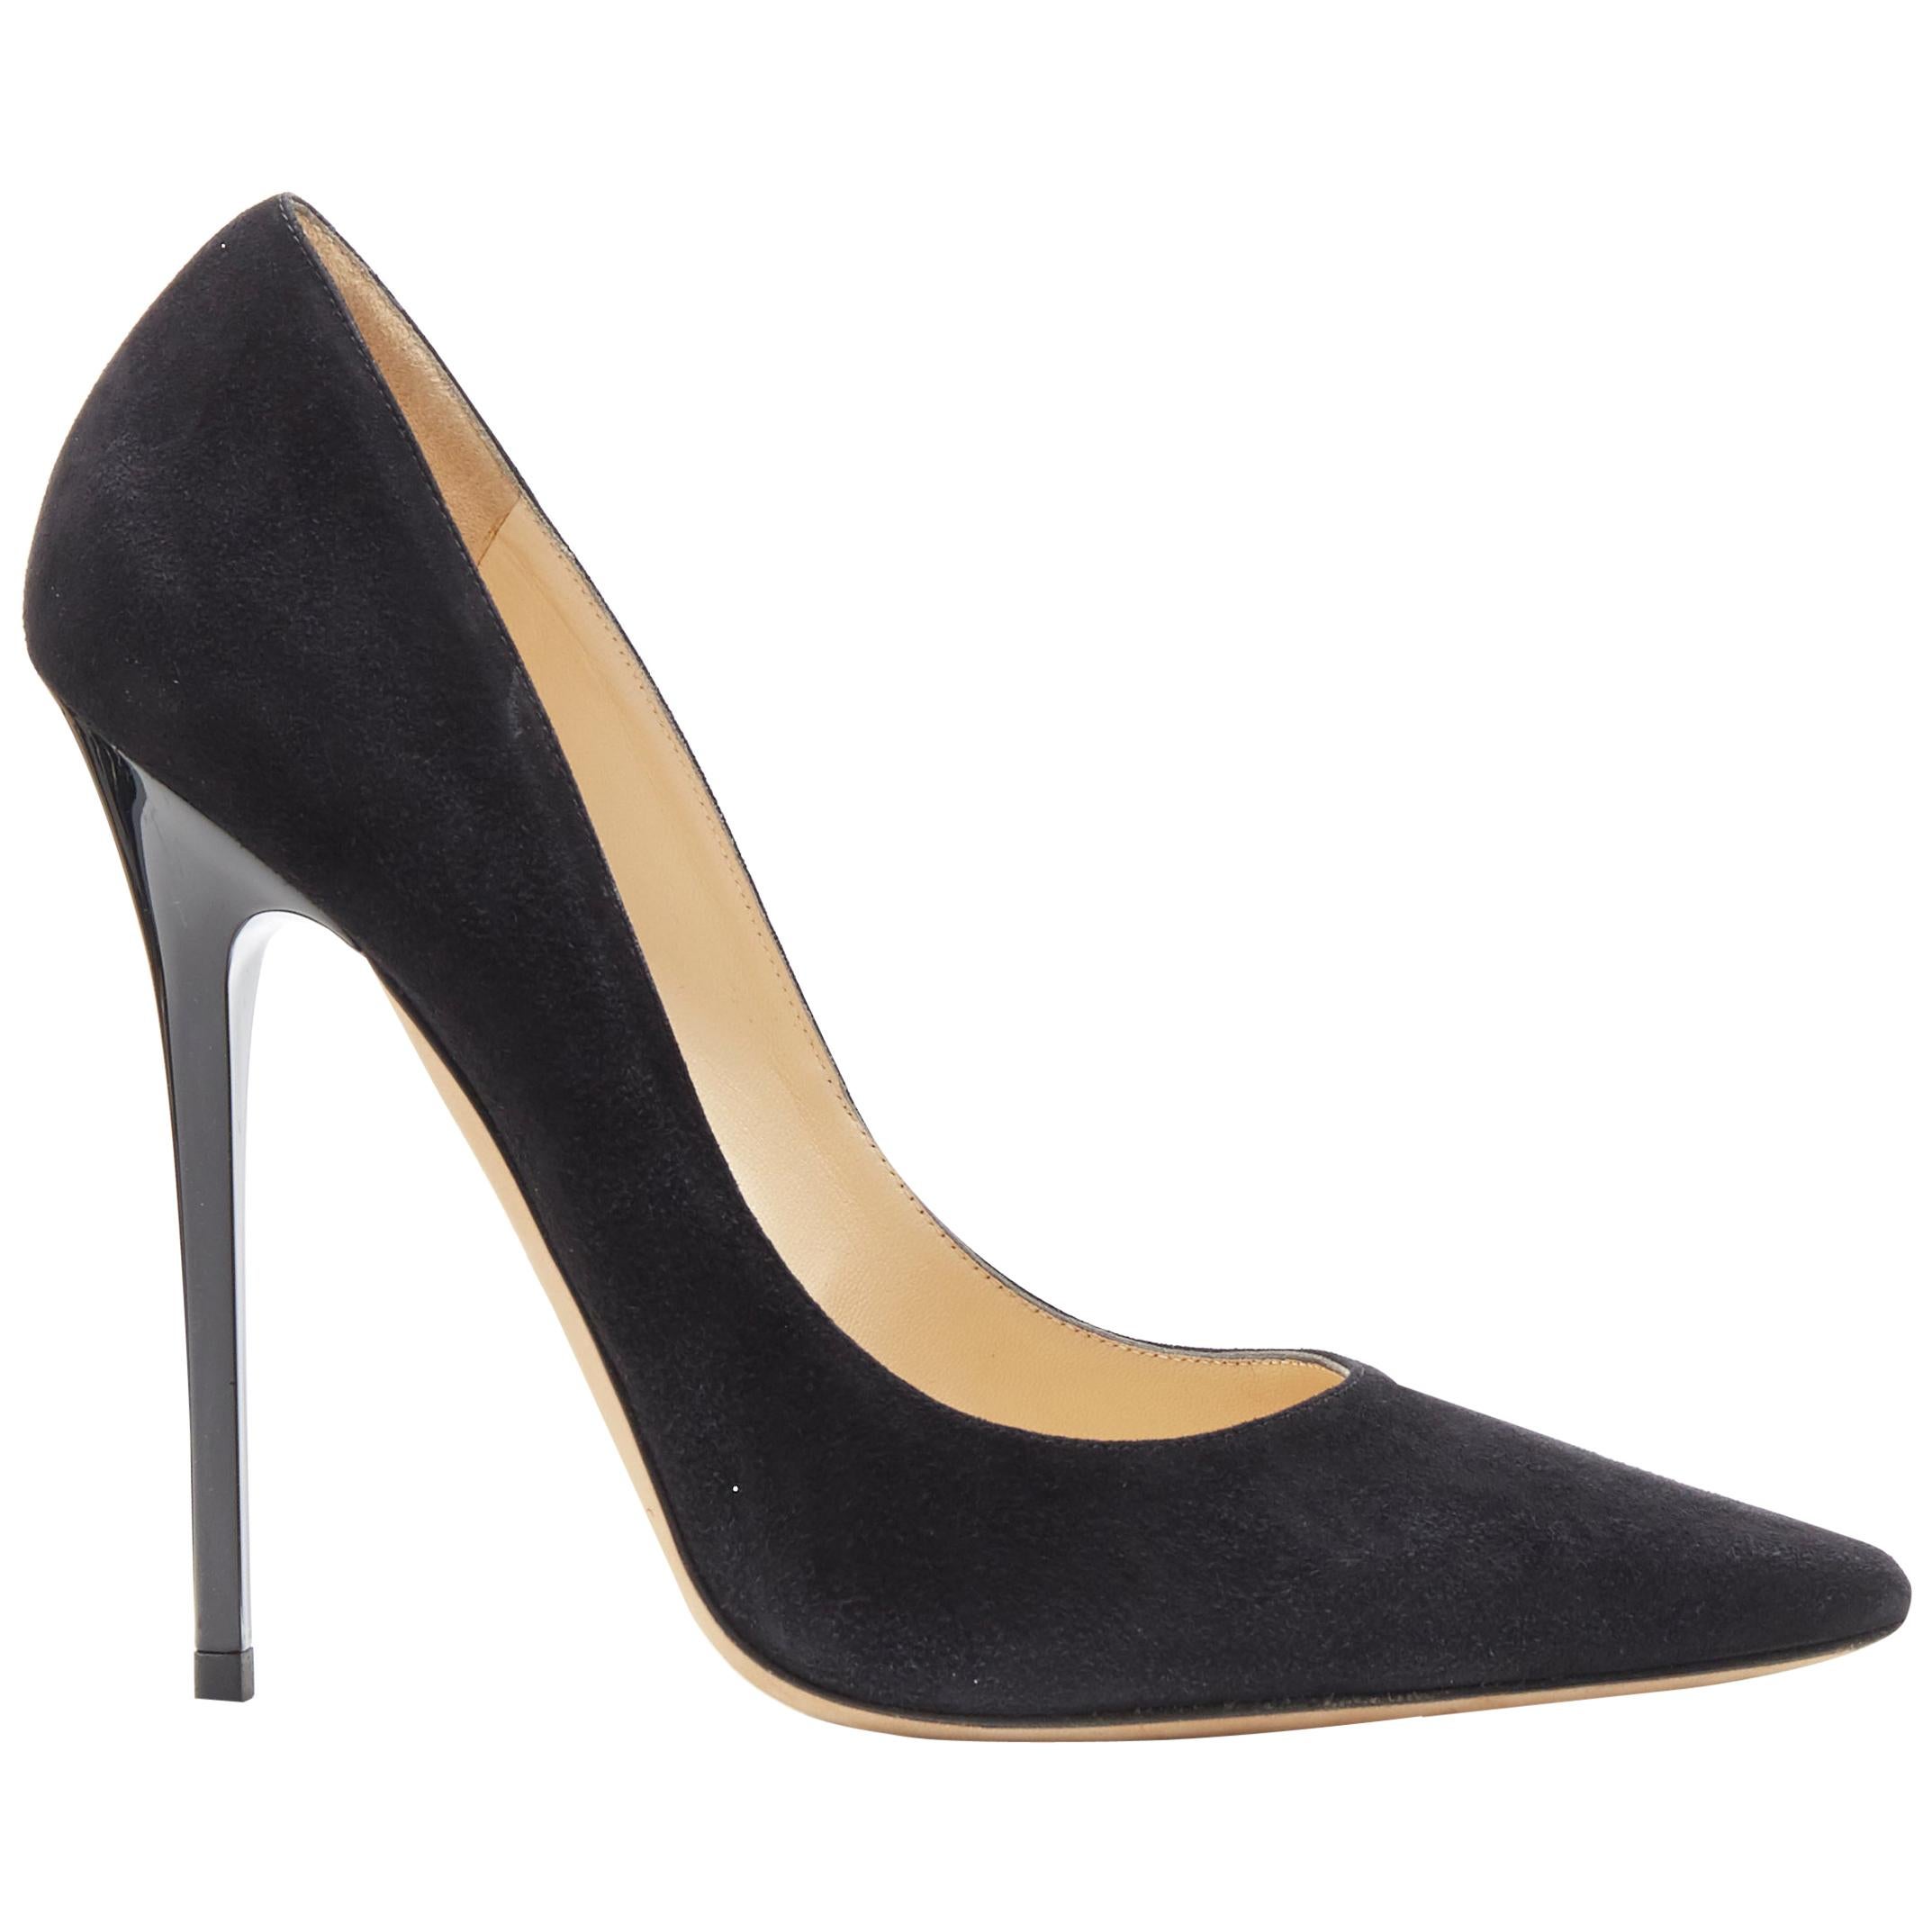 new JIMMY CHOO Anouk 120 black suede pointy toe pigalle stiletto pump EU38